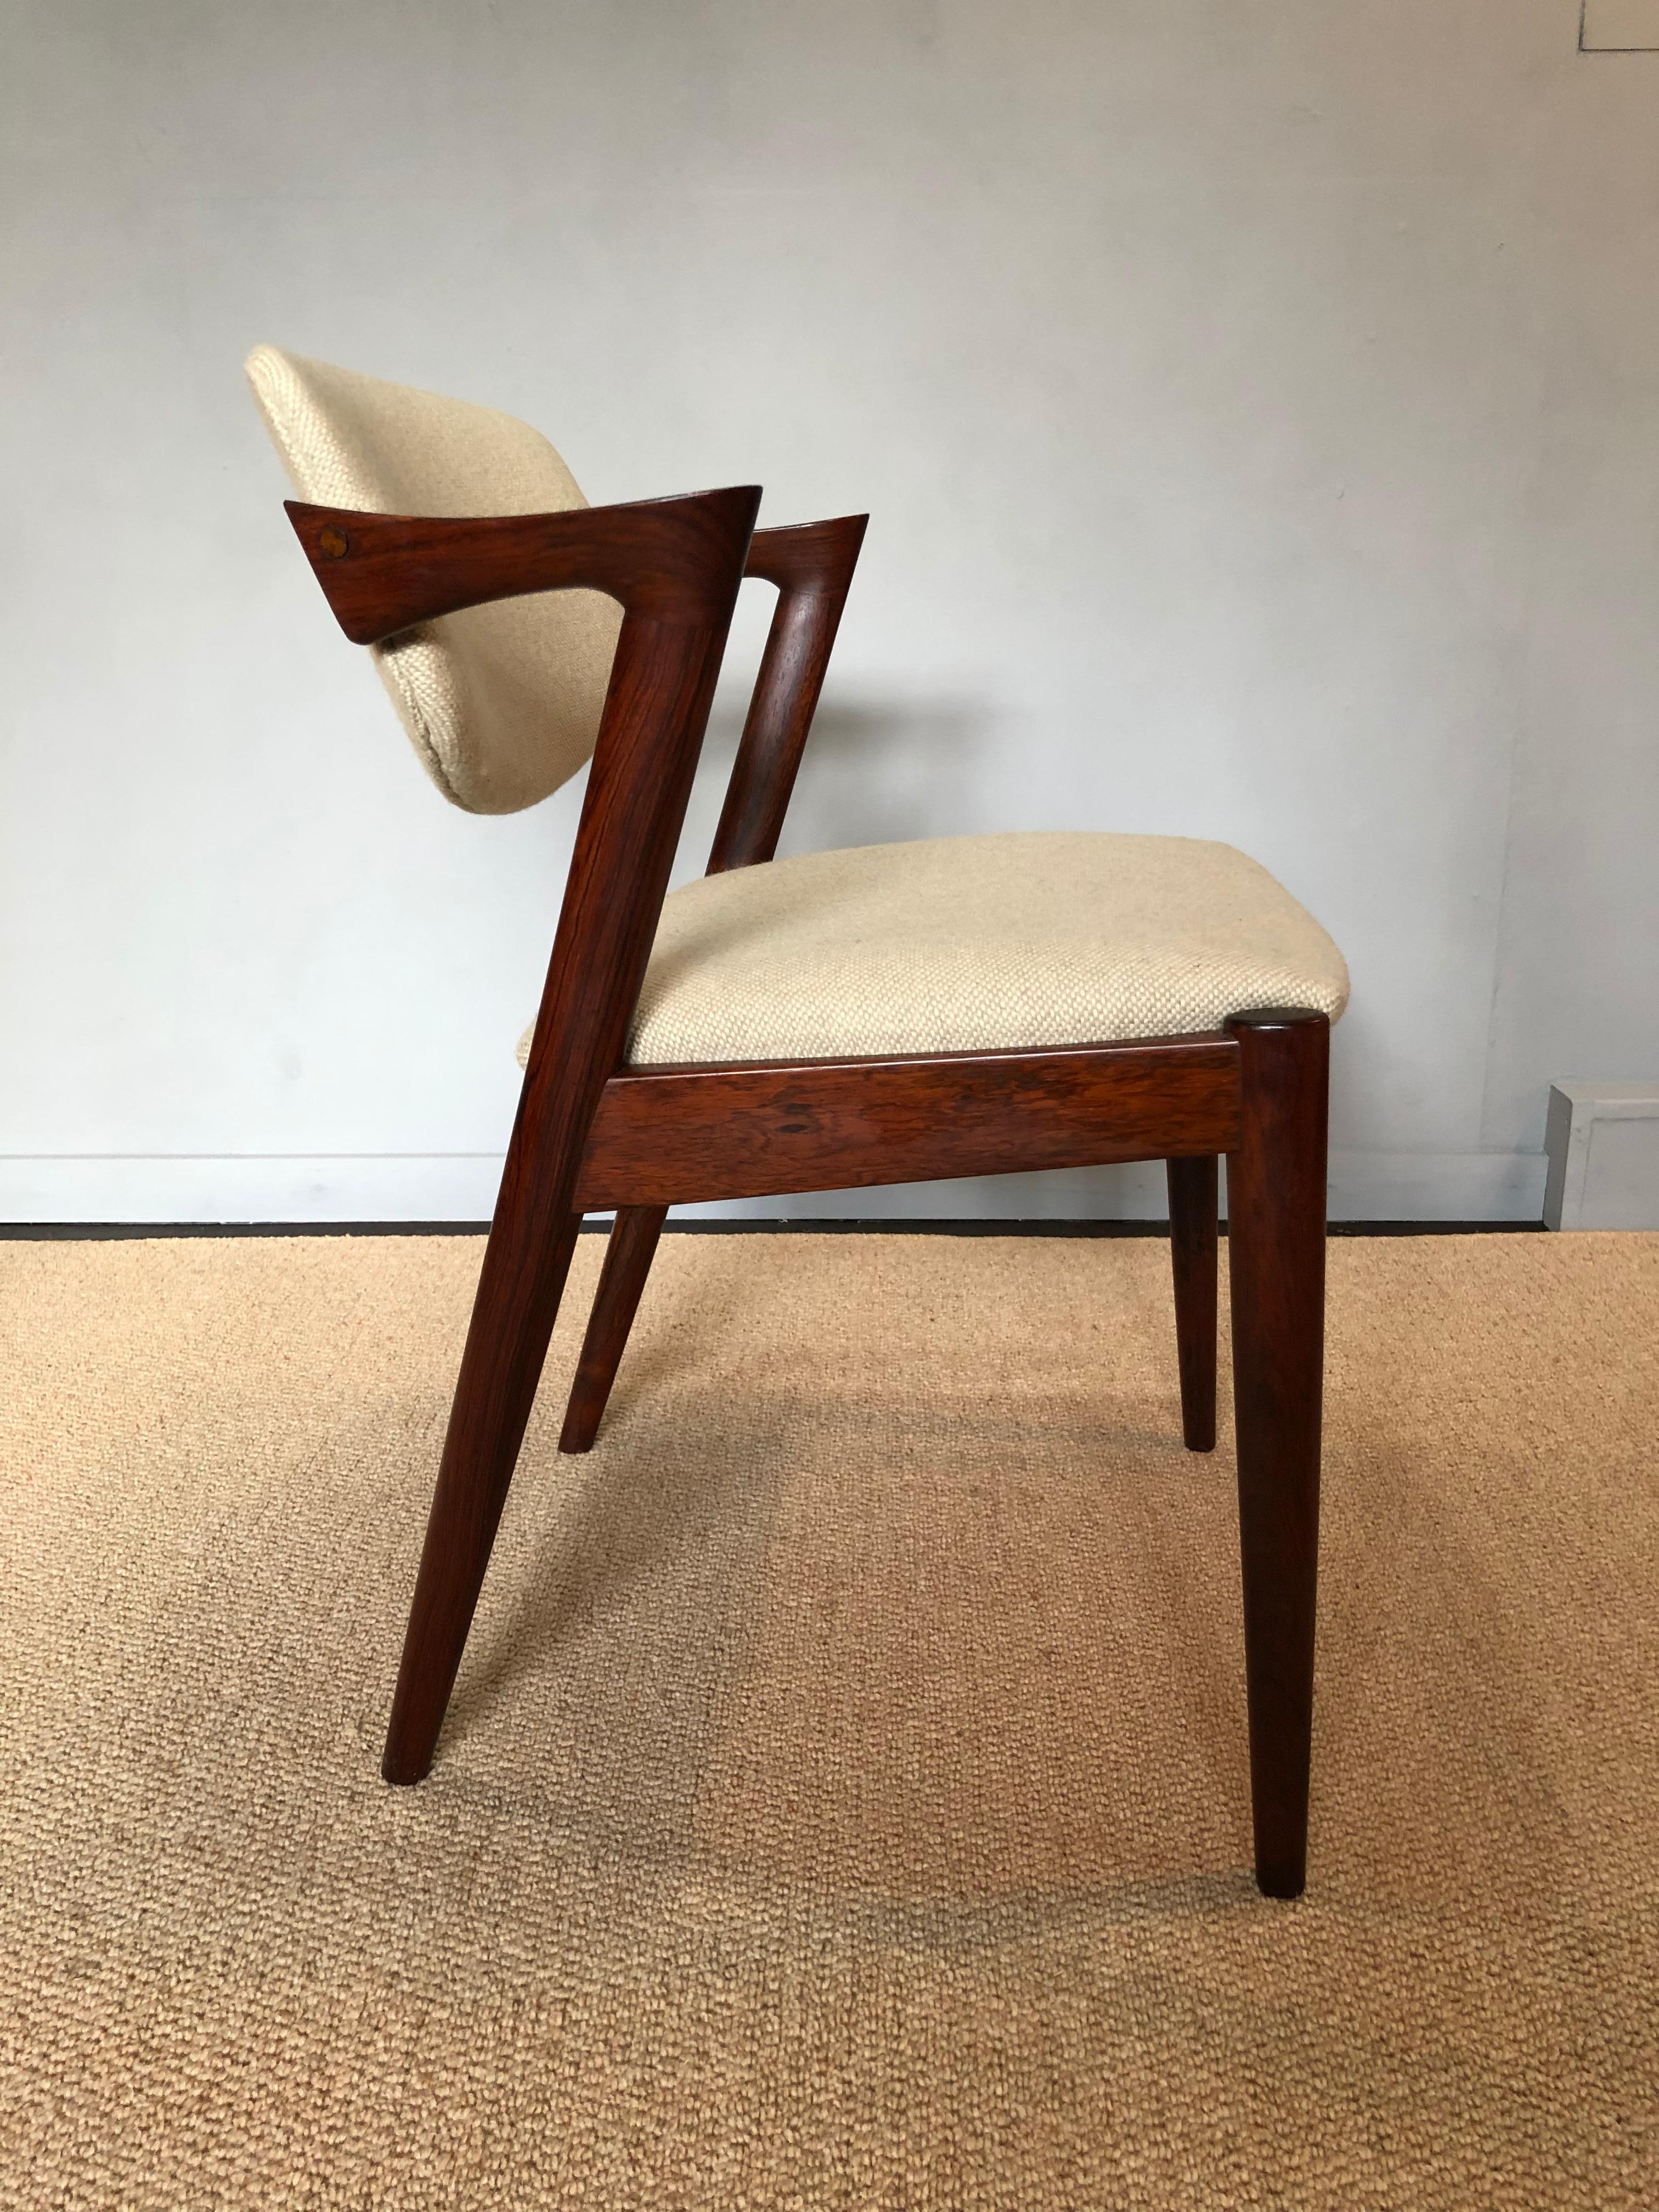 An absolutely superb matching set of original model 42 dining chairs by Kai Kristiansen. Produced by Schou Andersen, Denmark during the 1960s. Stunning walnut frames with wheat off-white weave fabric upholstery and pivot back rests. Fully